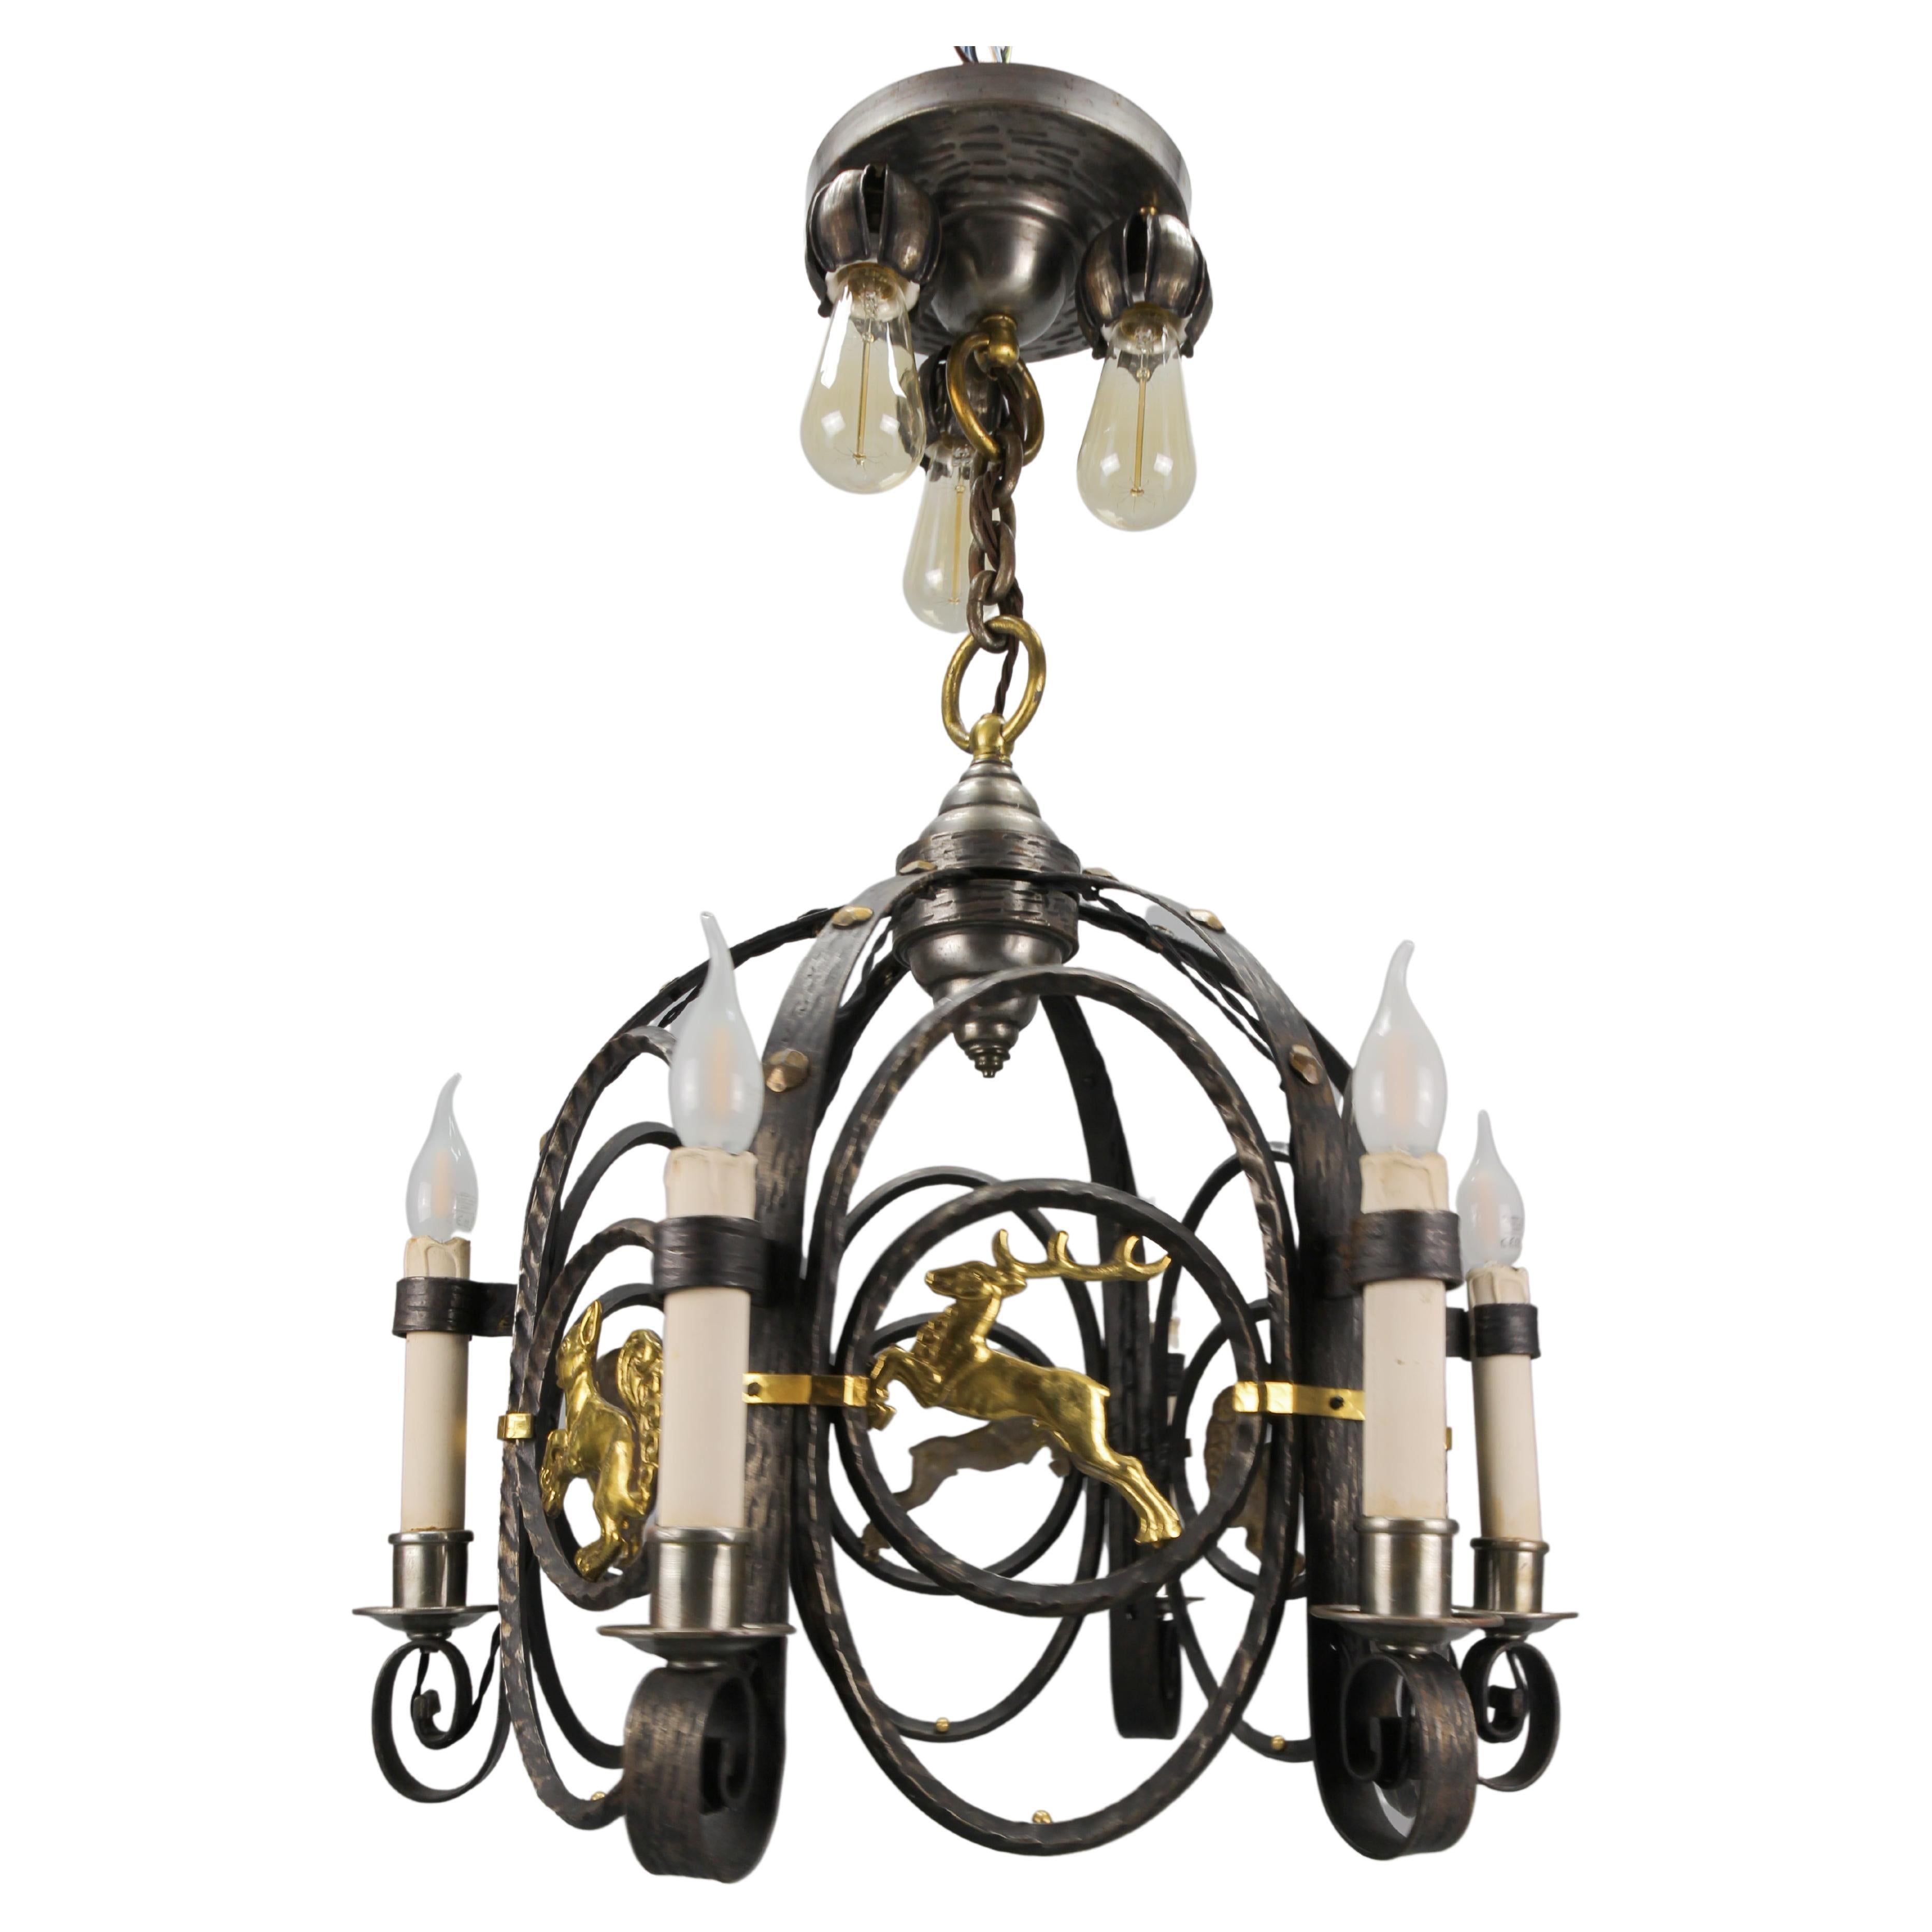 German Art Deco Nine-Light Wrought Iron and Brass Chandelier with Animals, 1920s